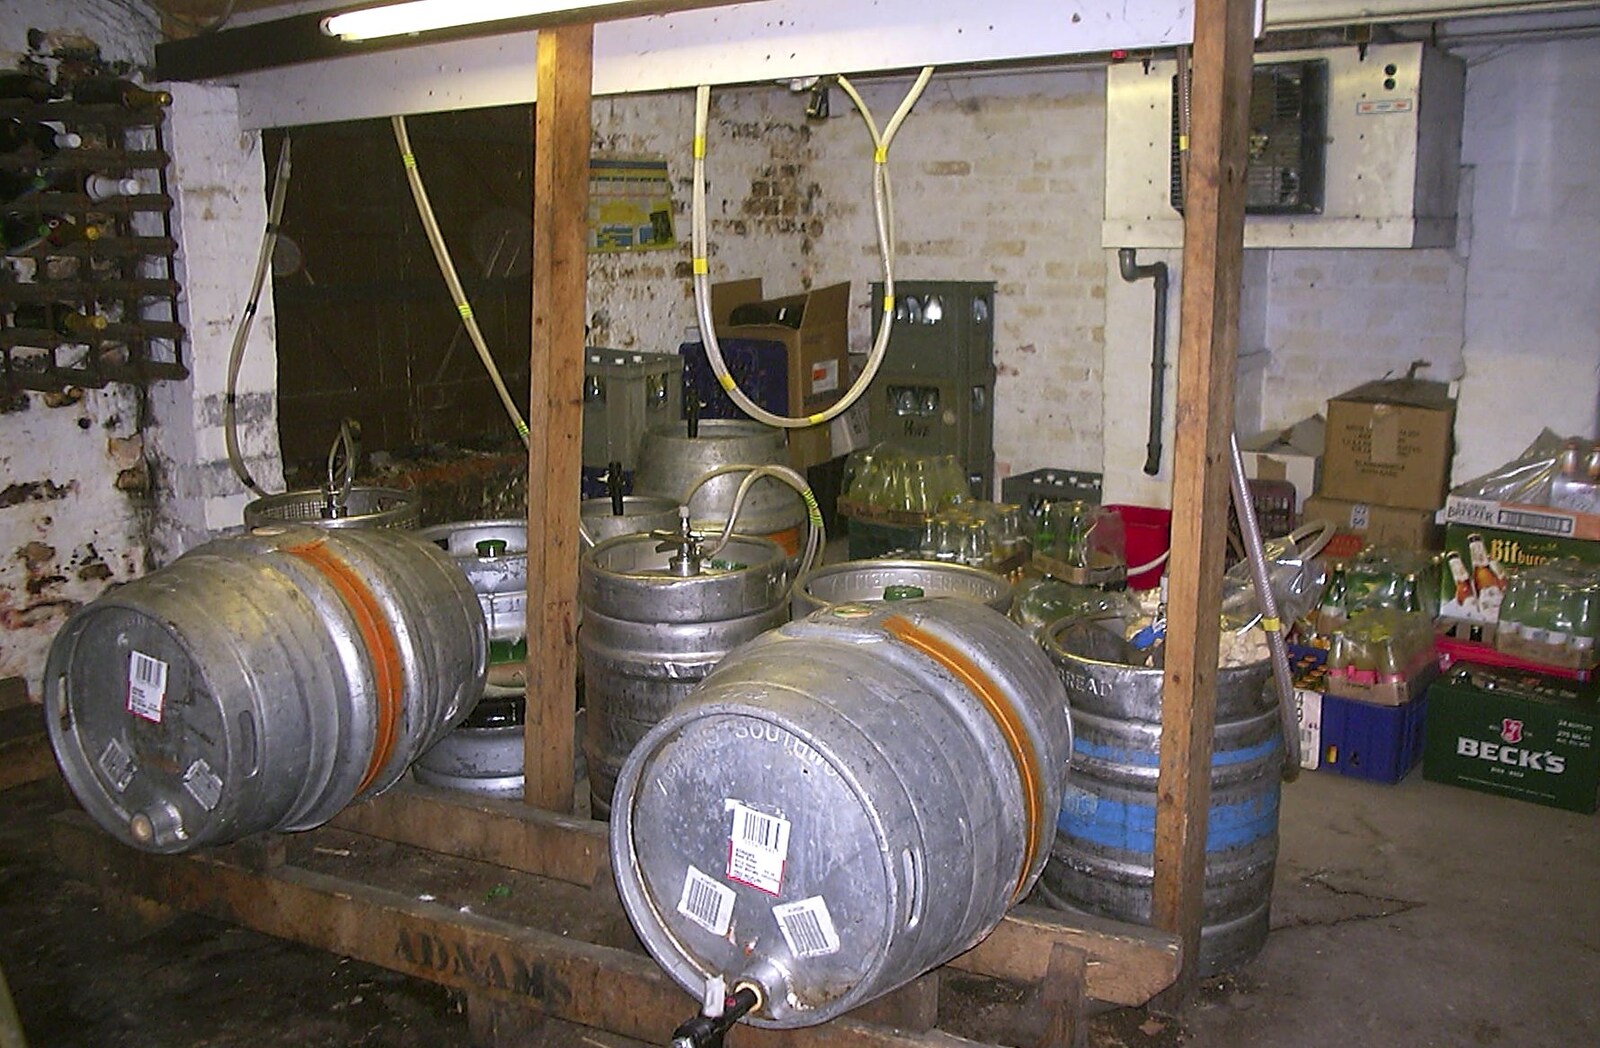 Barrels of beer in the Swan's cellar from The Swan's Cellar, and Bill's Mambo Night at the Barrel, Banham, Norfolk - 6th February 2004